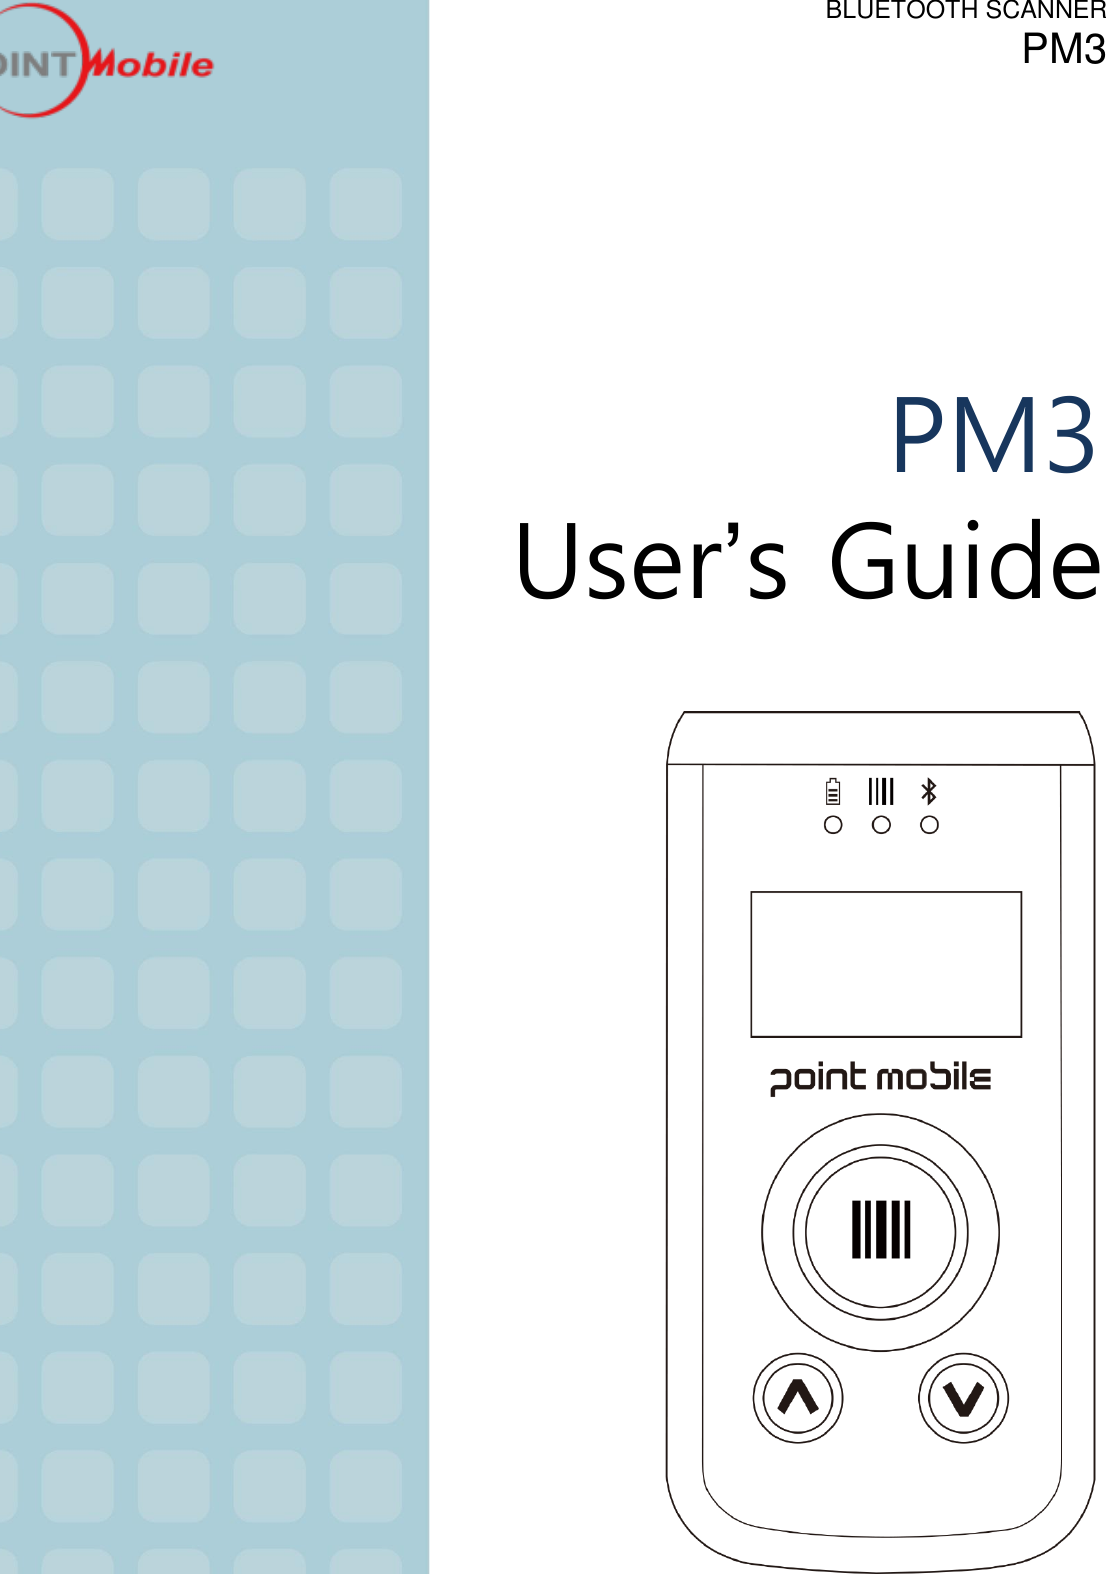                                                                                                                                                                                                                                      CONTENTS   BLUETOOTH SCANNER PM3 PM3 User’s Guide  